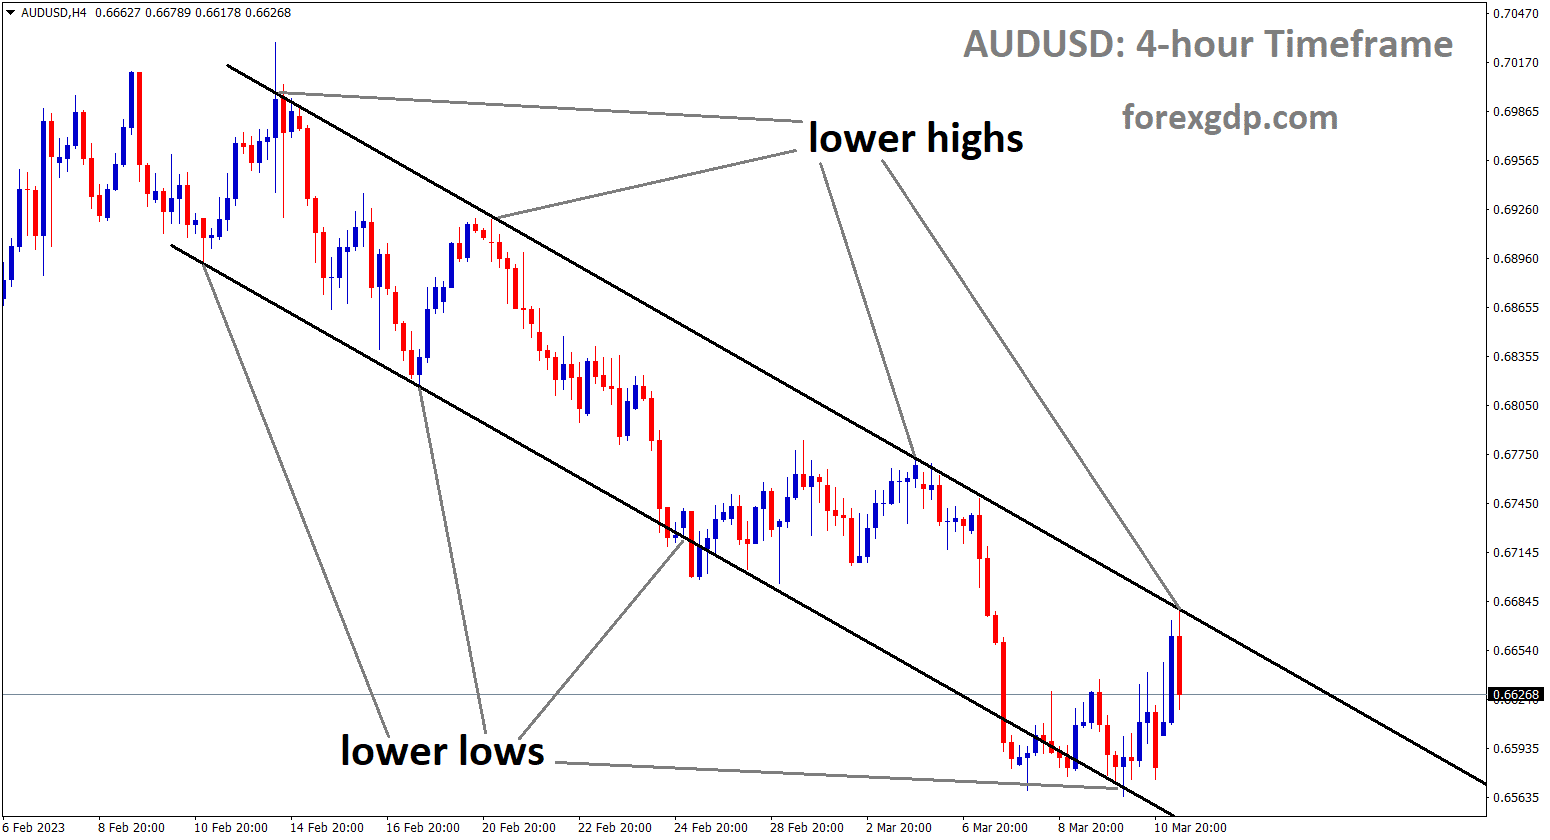 AUDUSD is moving in Descending Channel and the market has reached the lower high area of the channel.